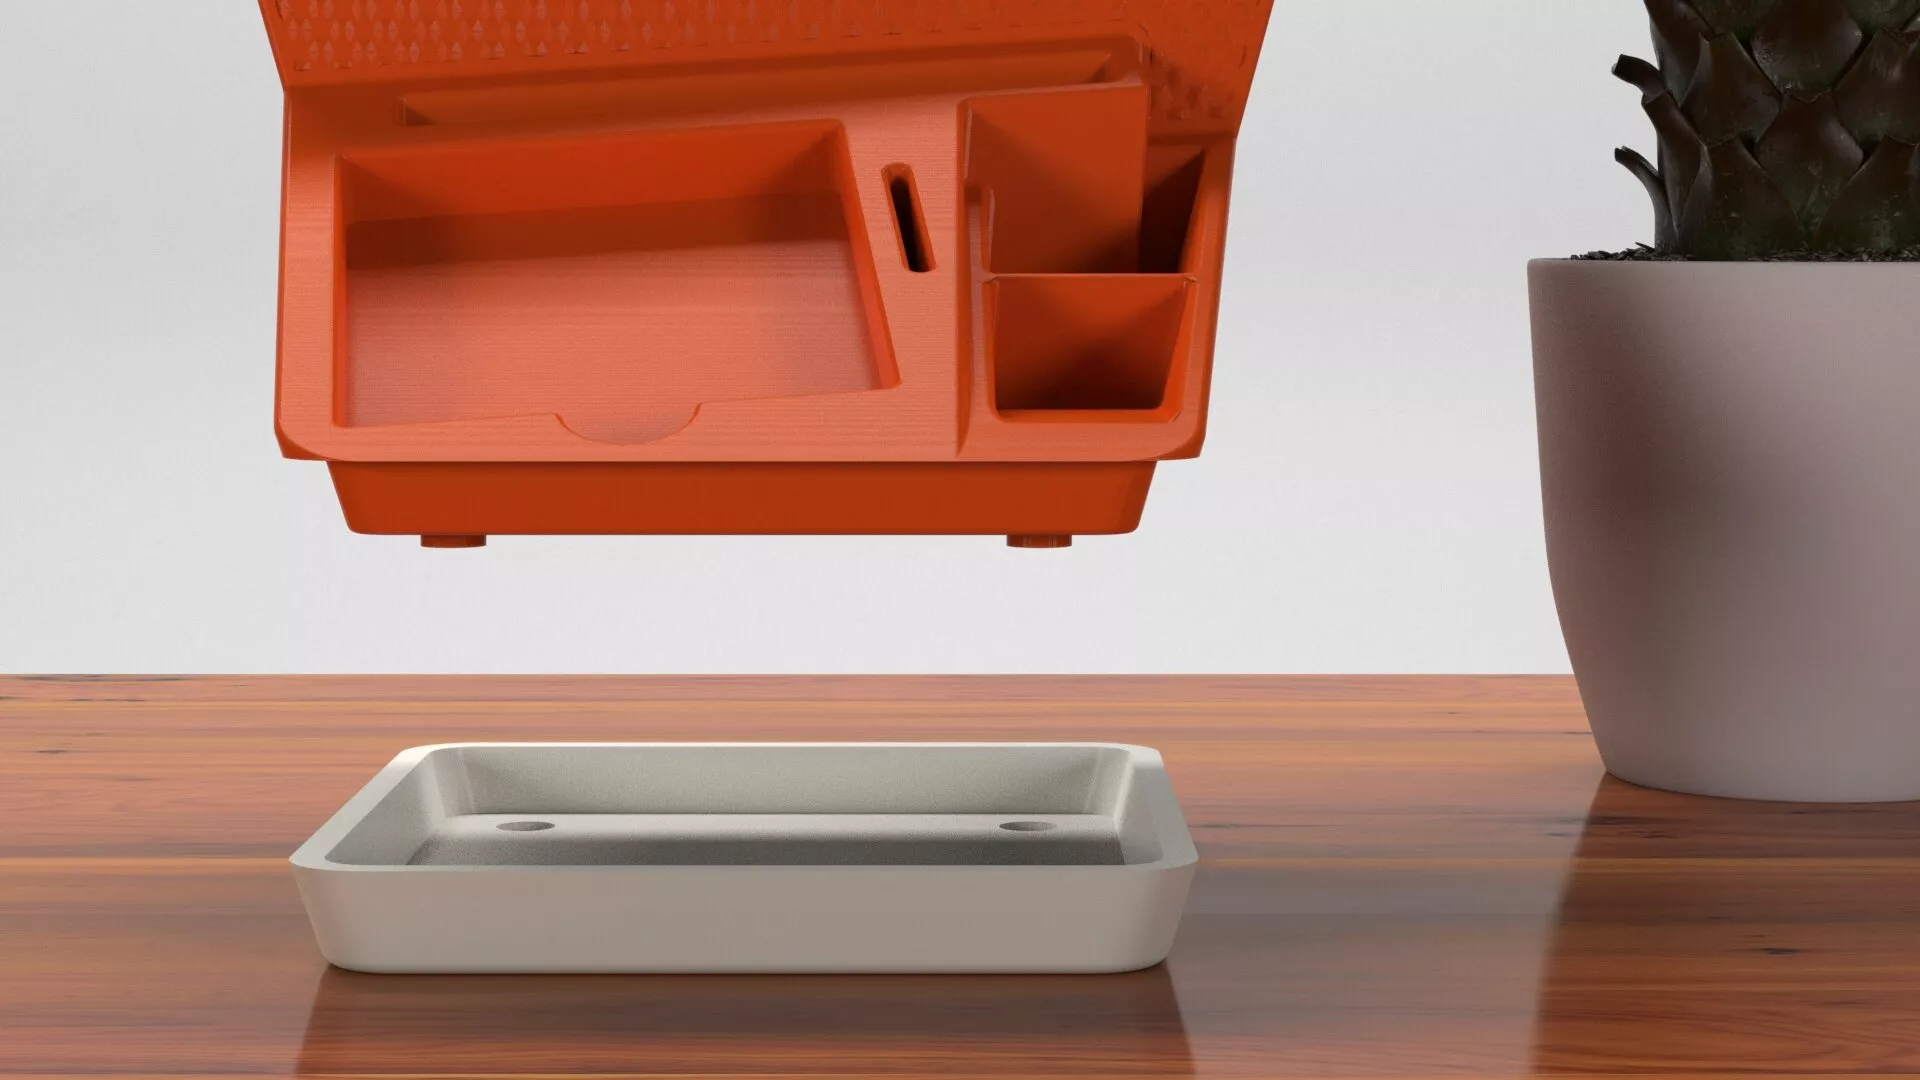 GoEngineer Community 3D printing design content winner, Bring Back the Cool Desk Organizer render two piece seperated view